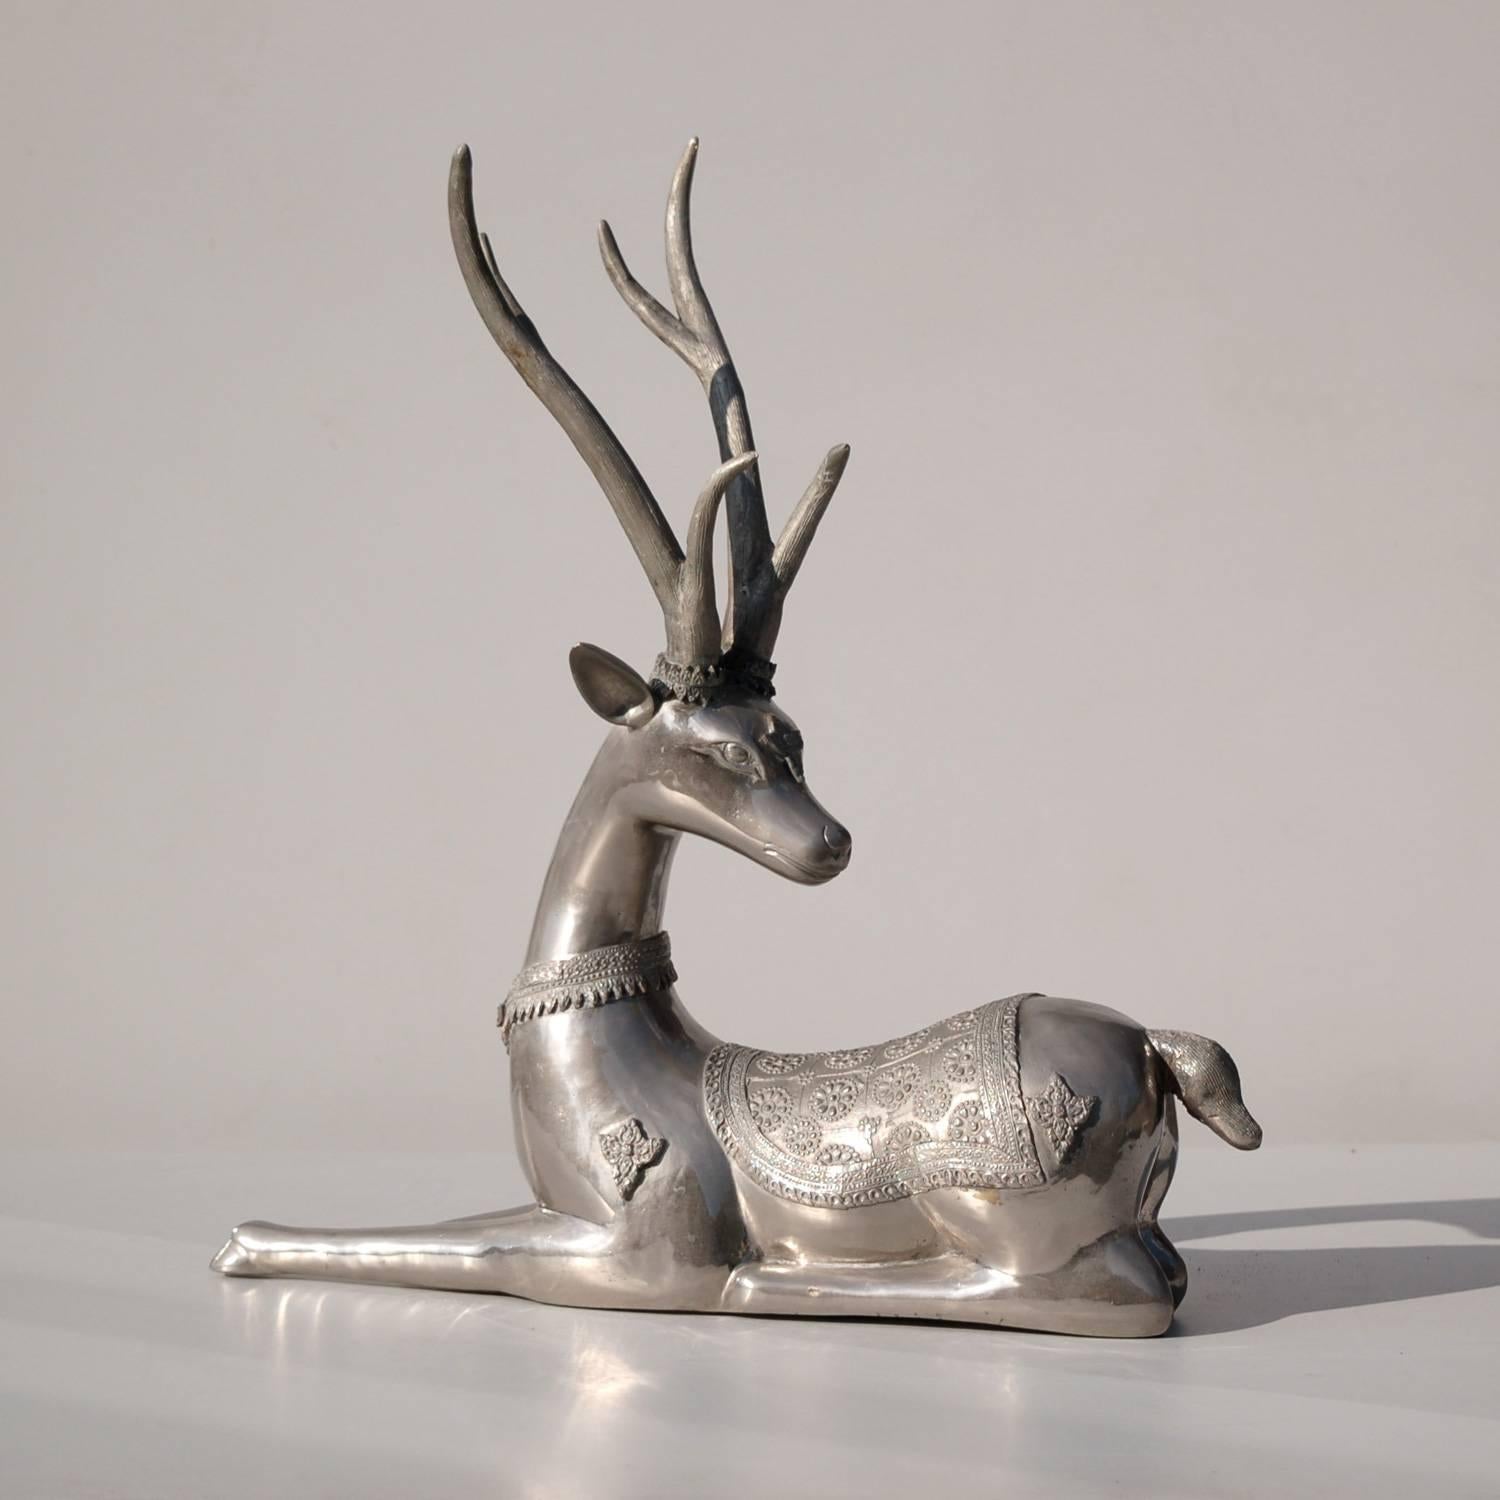 Decorative silver coloured statue or animal floor schulpture with fine detailing of a resting male deer or buck with antlers.